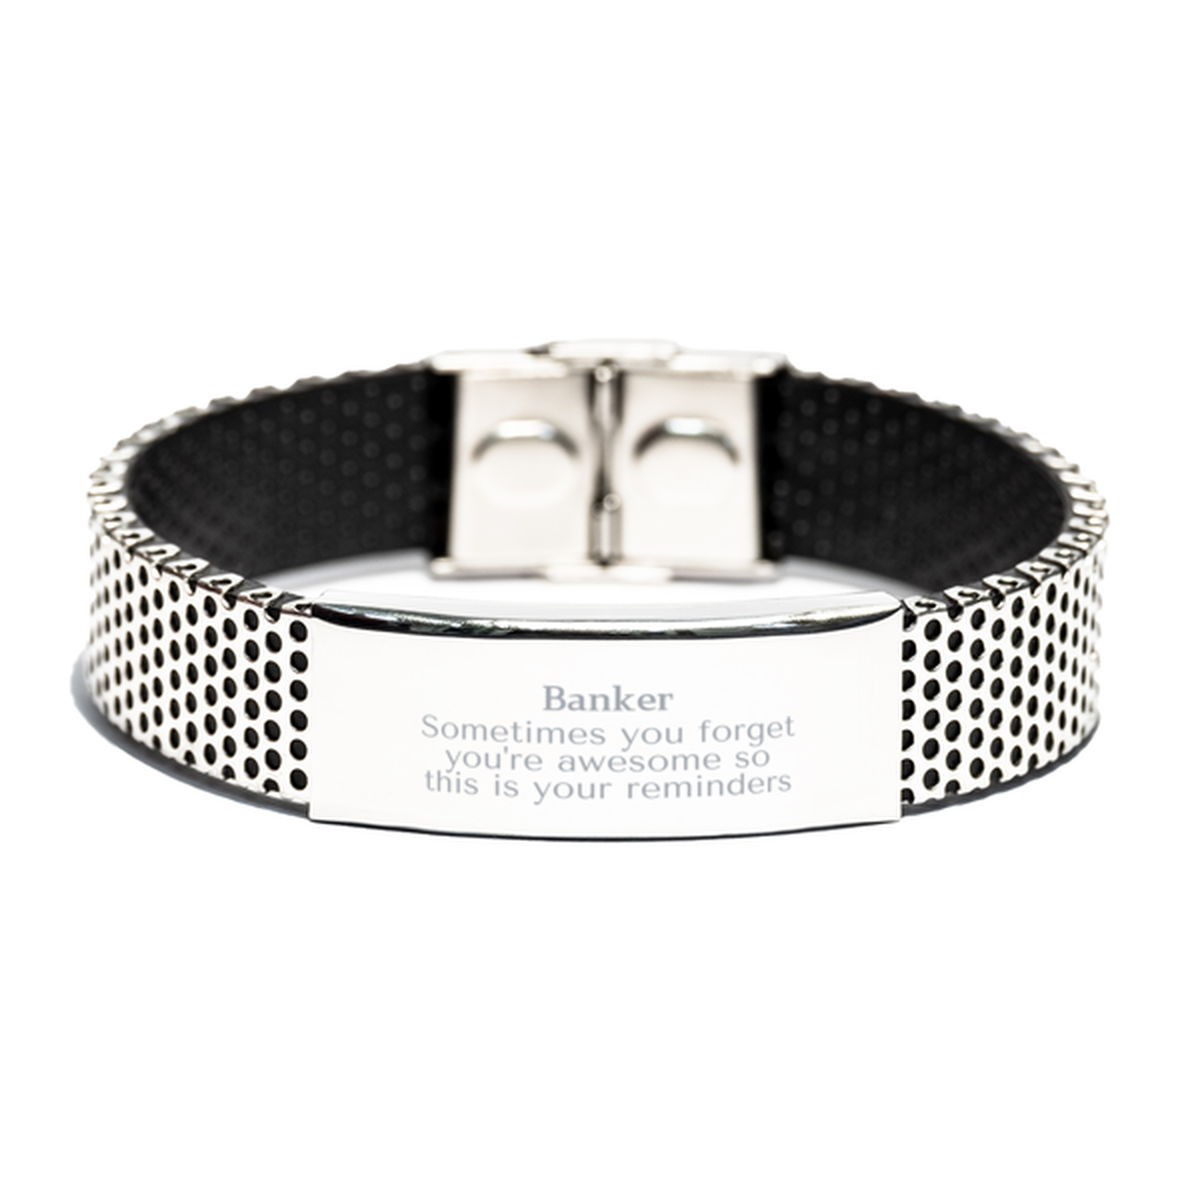 Sentimental Banker Stainless Steel Bracelet, Banker Sometimes you forget you're awesome so this is your reminders, Graduation Christmas Birthday Gifts for Banker, Men, Women, Coworkers